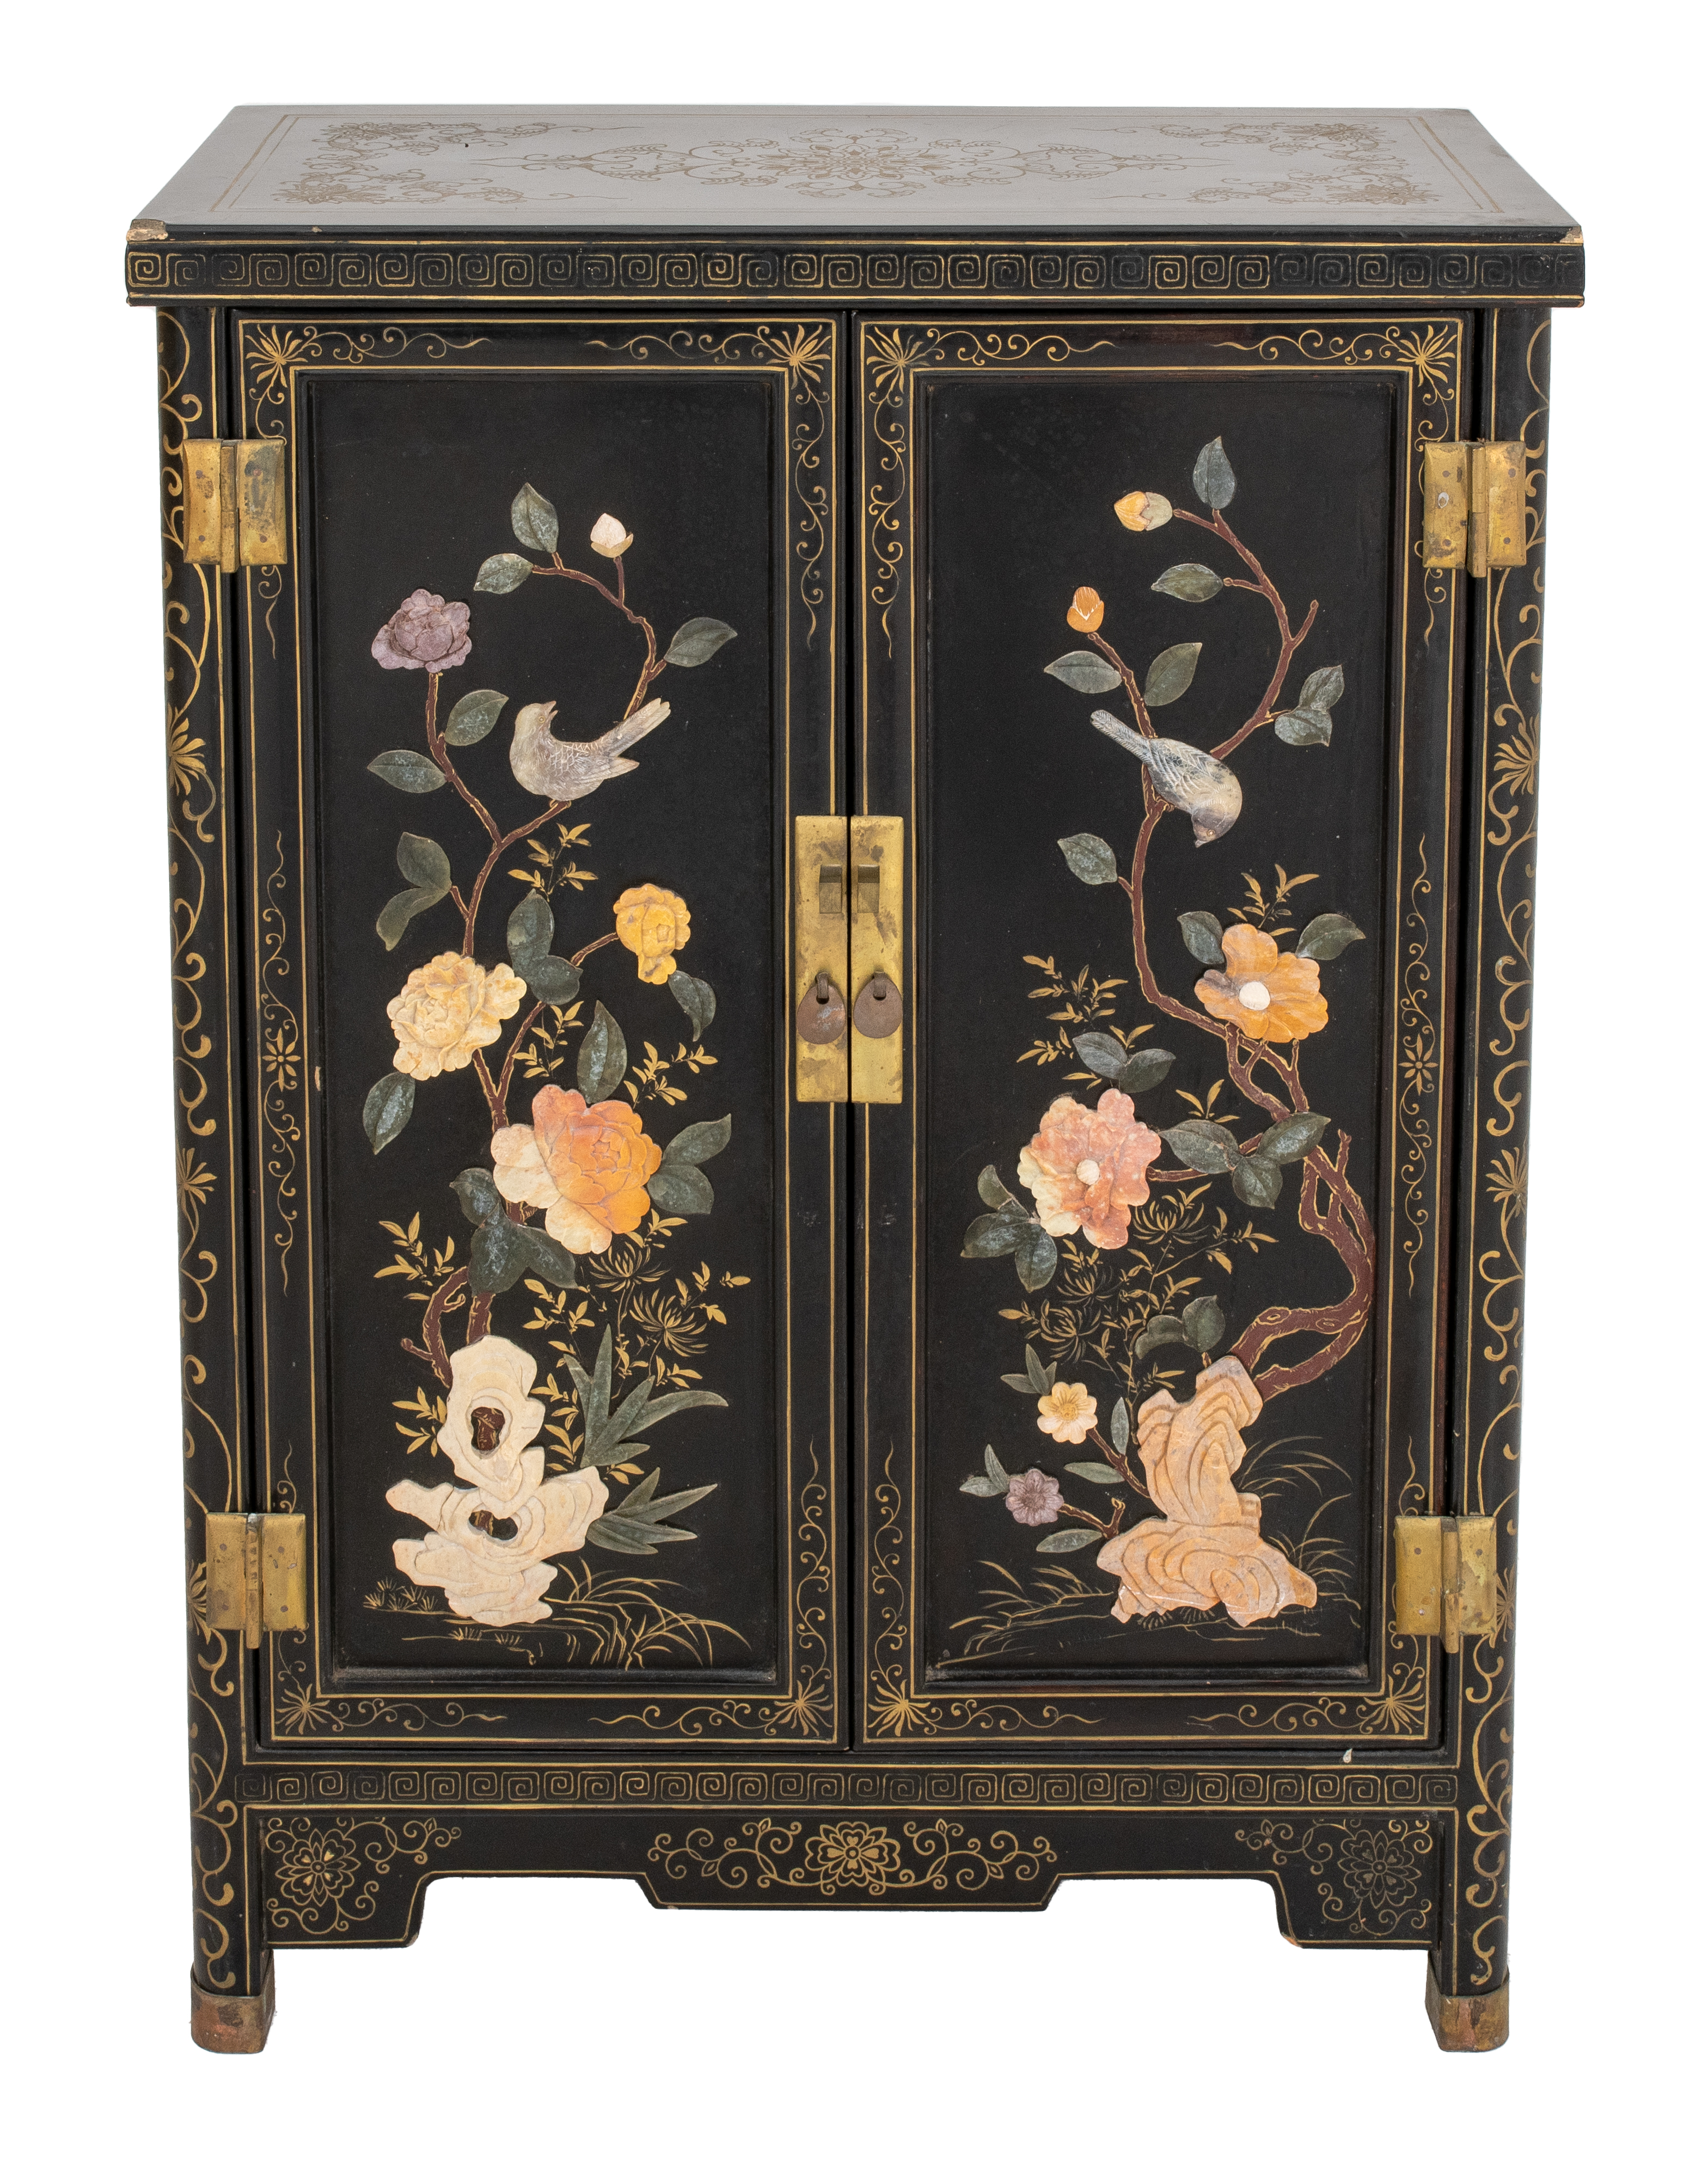 CHINESE BLACK LACQUERED STONE INLAID 2bdb3f